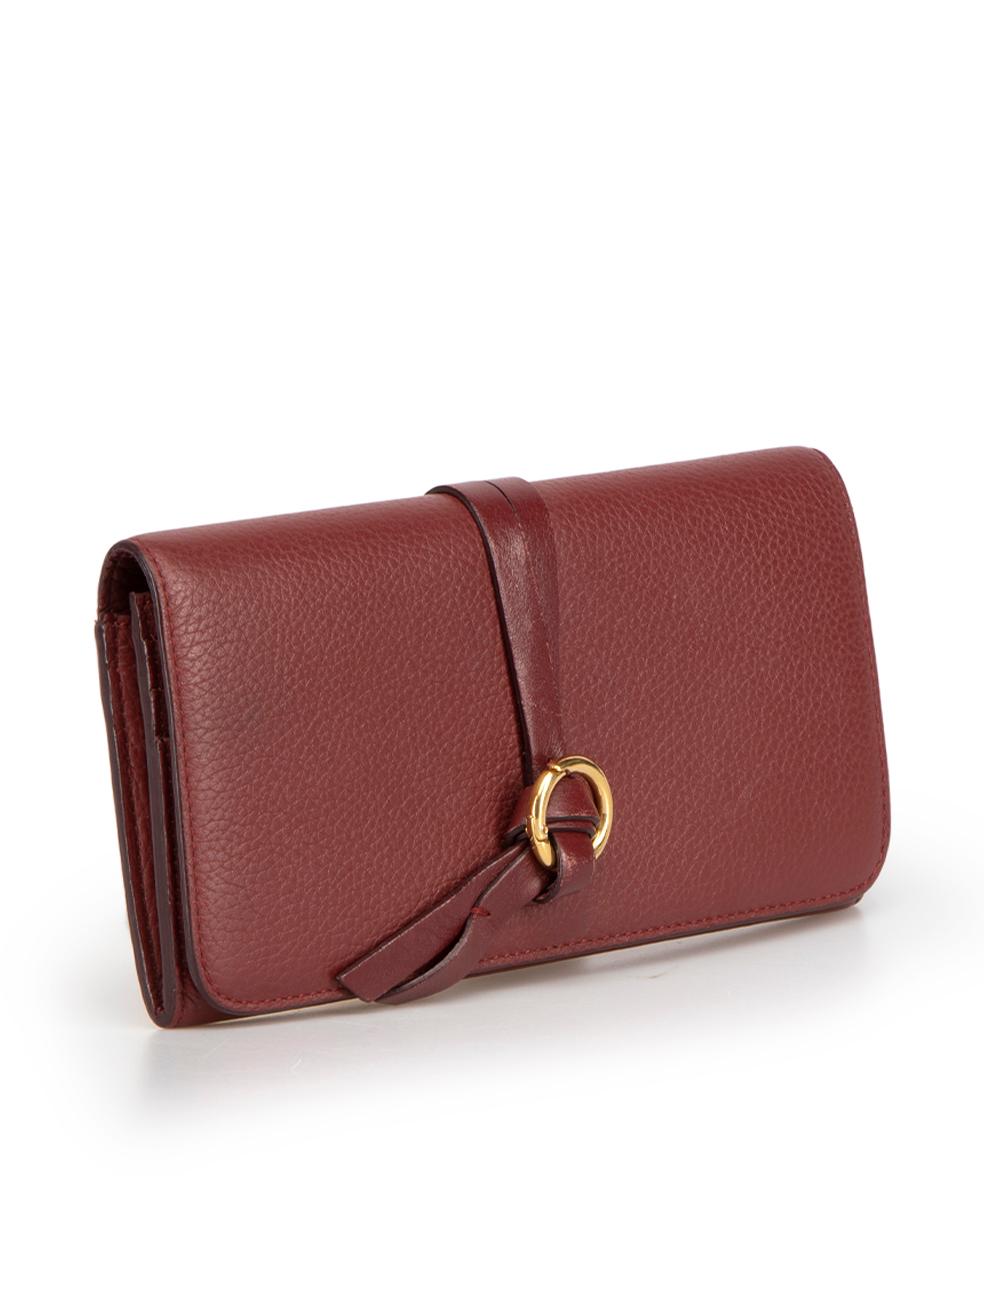 CONDITION is Very good. Minimal wear to purse is evident. Minimal wear to the front leather straps with scuffing on this used Chloé designer resale item. This item comes with original dust bag.



Details


Burgundy

Leather

Wallet

Gold tone